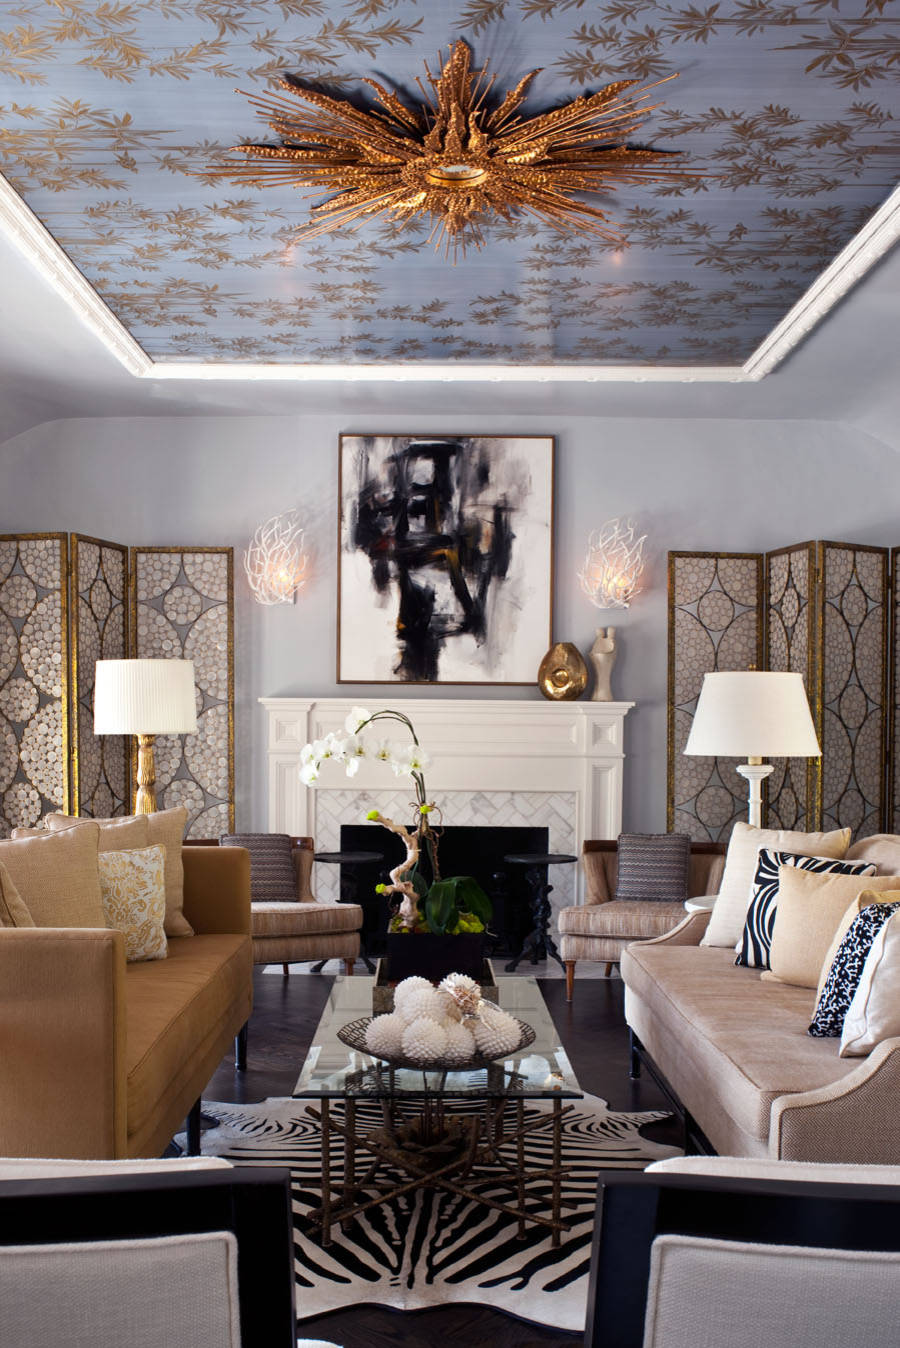 25 Wallpaper Ceiling Ideas For A Wow Effect - DigsDigs